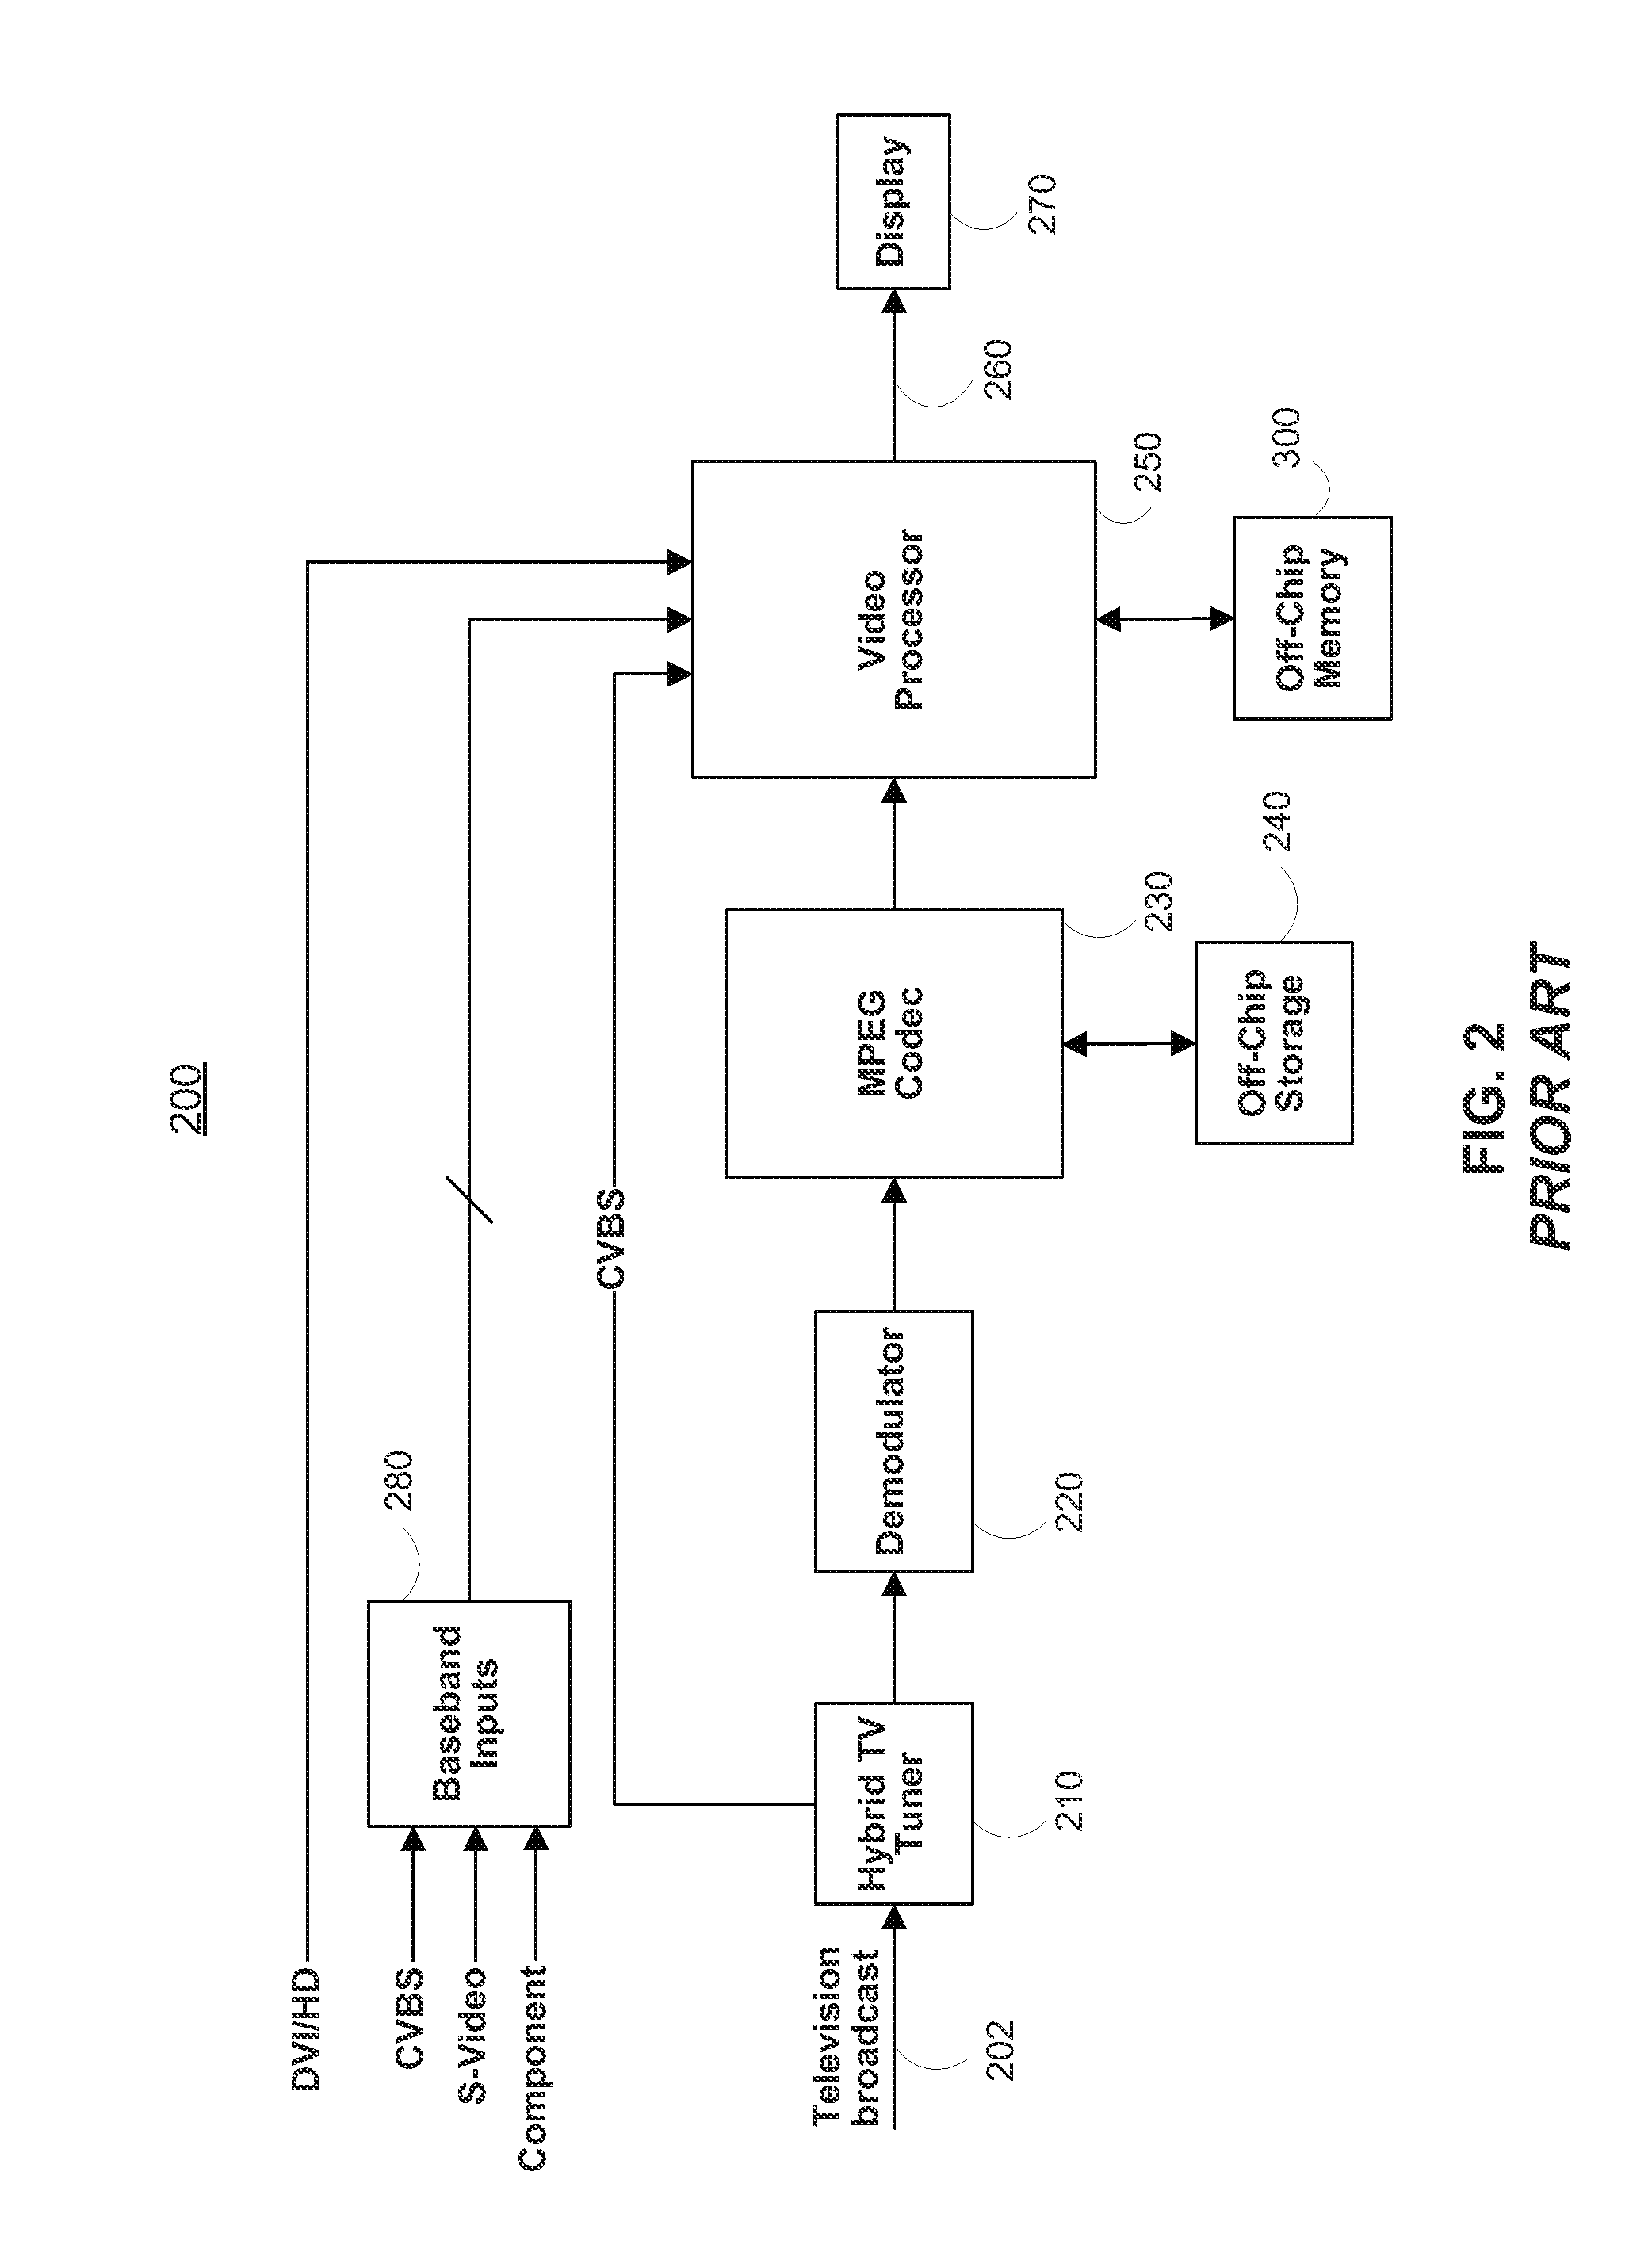 Shared memory multi video channel display apparatus and methods